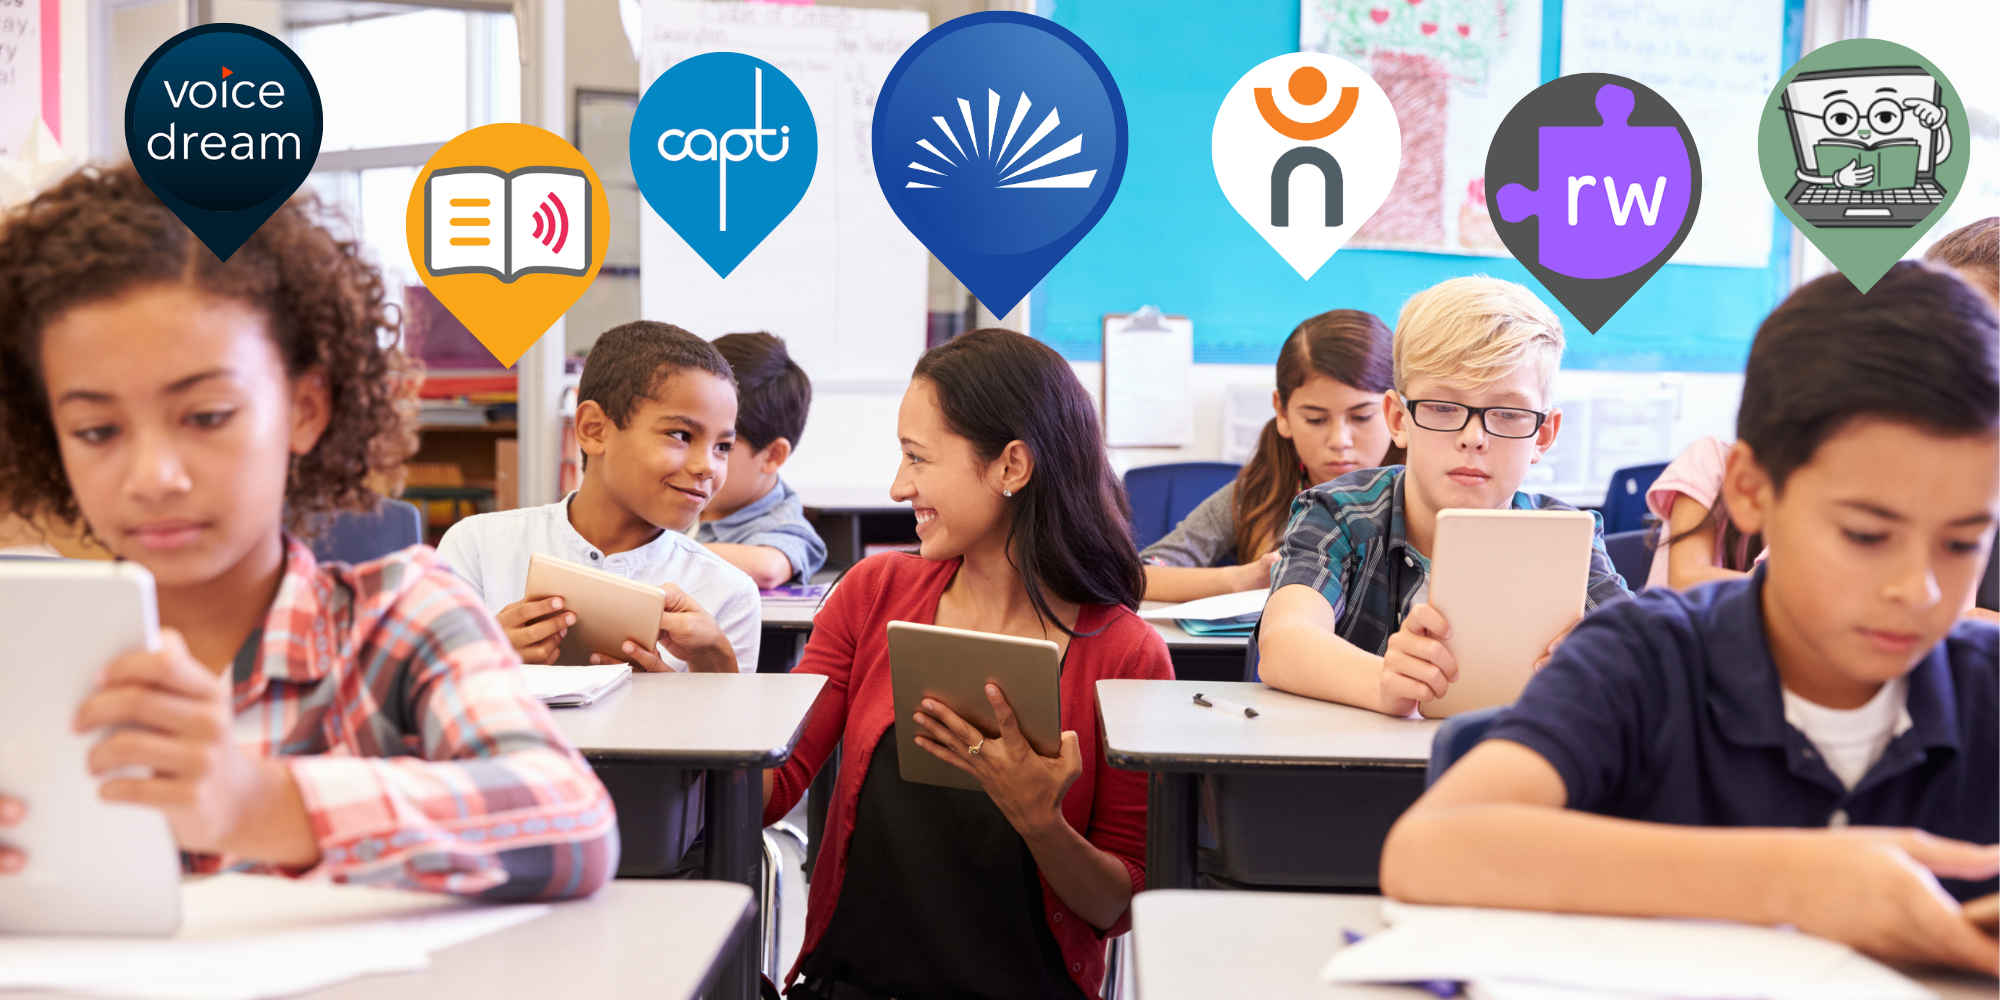 Teacher working with students at their desks with tablets. Collage of Assistive Technology logos like Bookshare Reader, Dolphin EasyReader, Voice Dream Reader, and more.